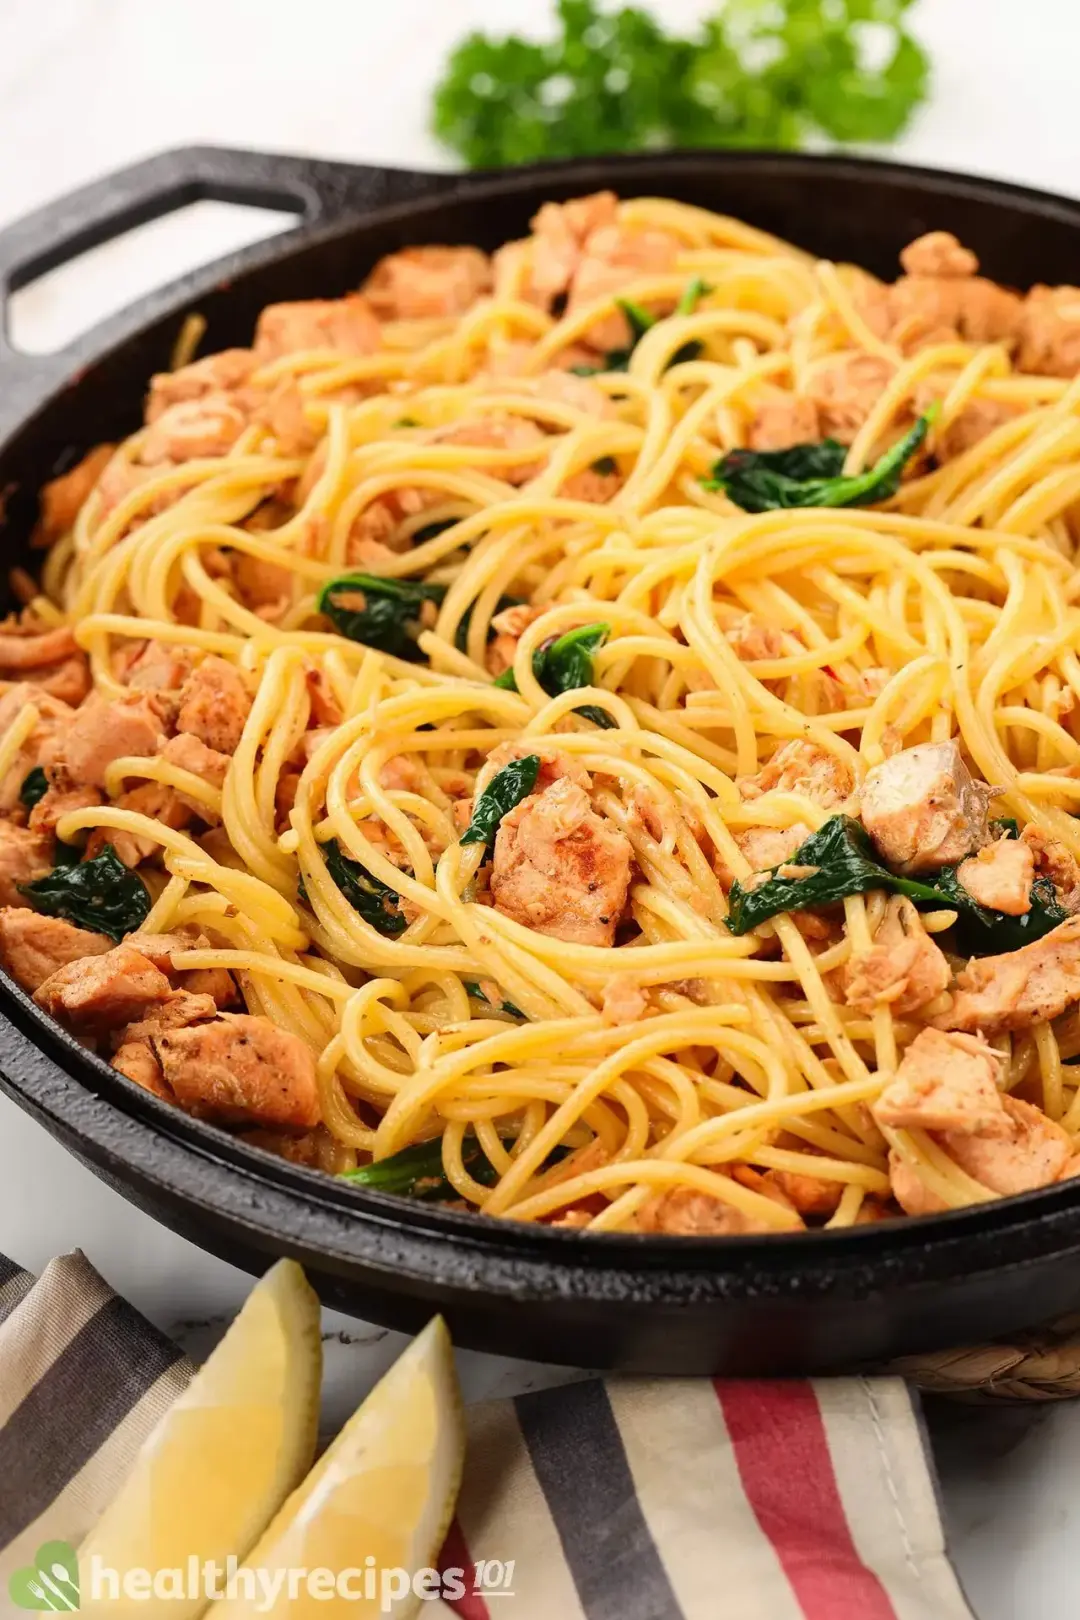 A skillet filled with spaghetti, cooked salmon cubes, and cooked spinach laid near a striped tablecloth, two lemon wedges, and fresh parsley